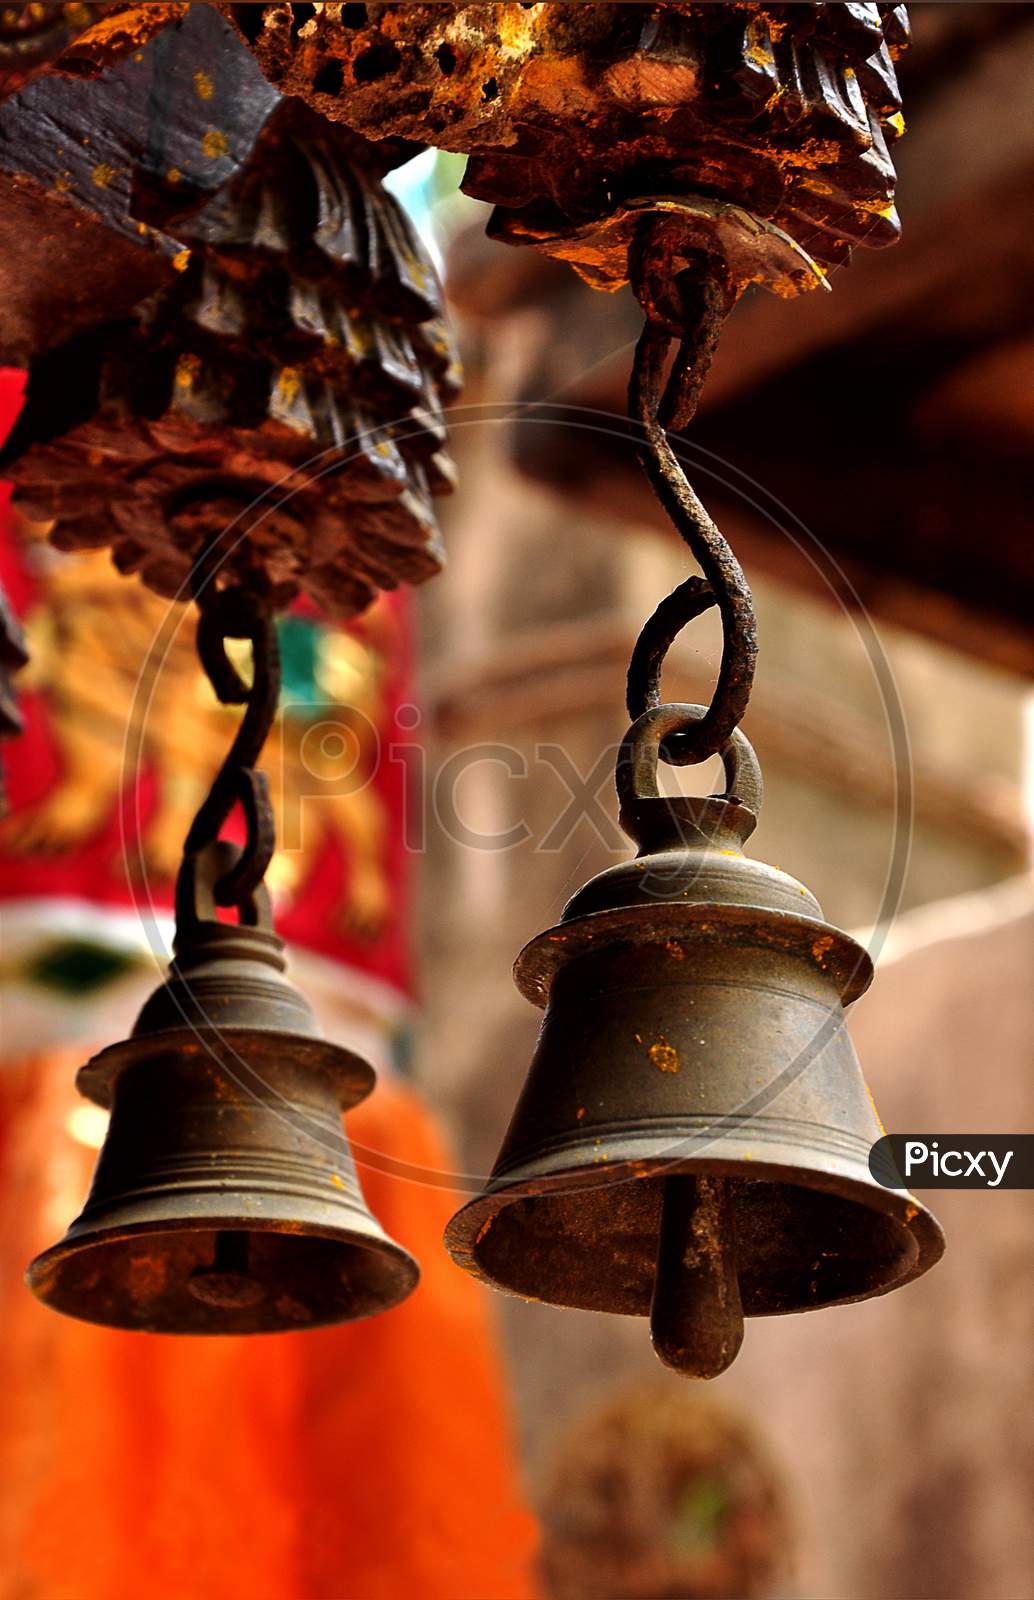 Two ancient type bells hanging in a temple